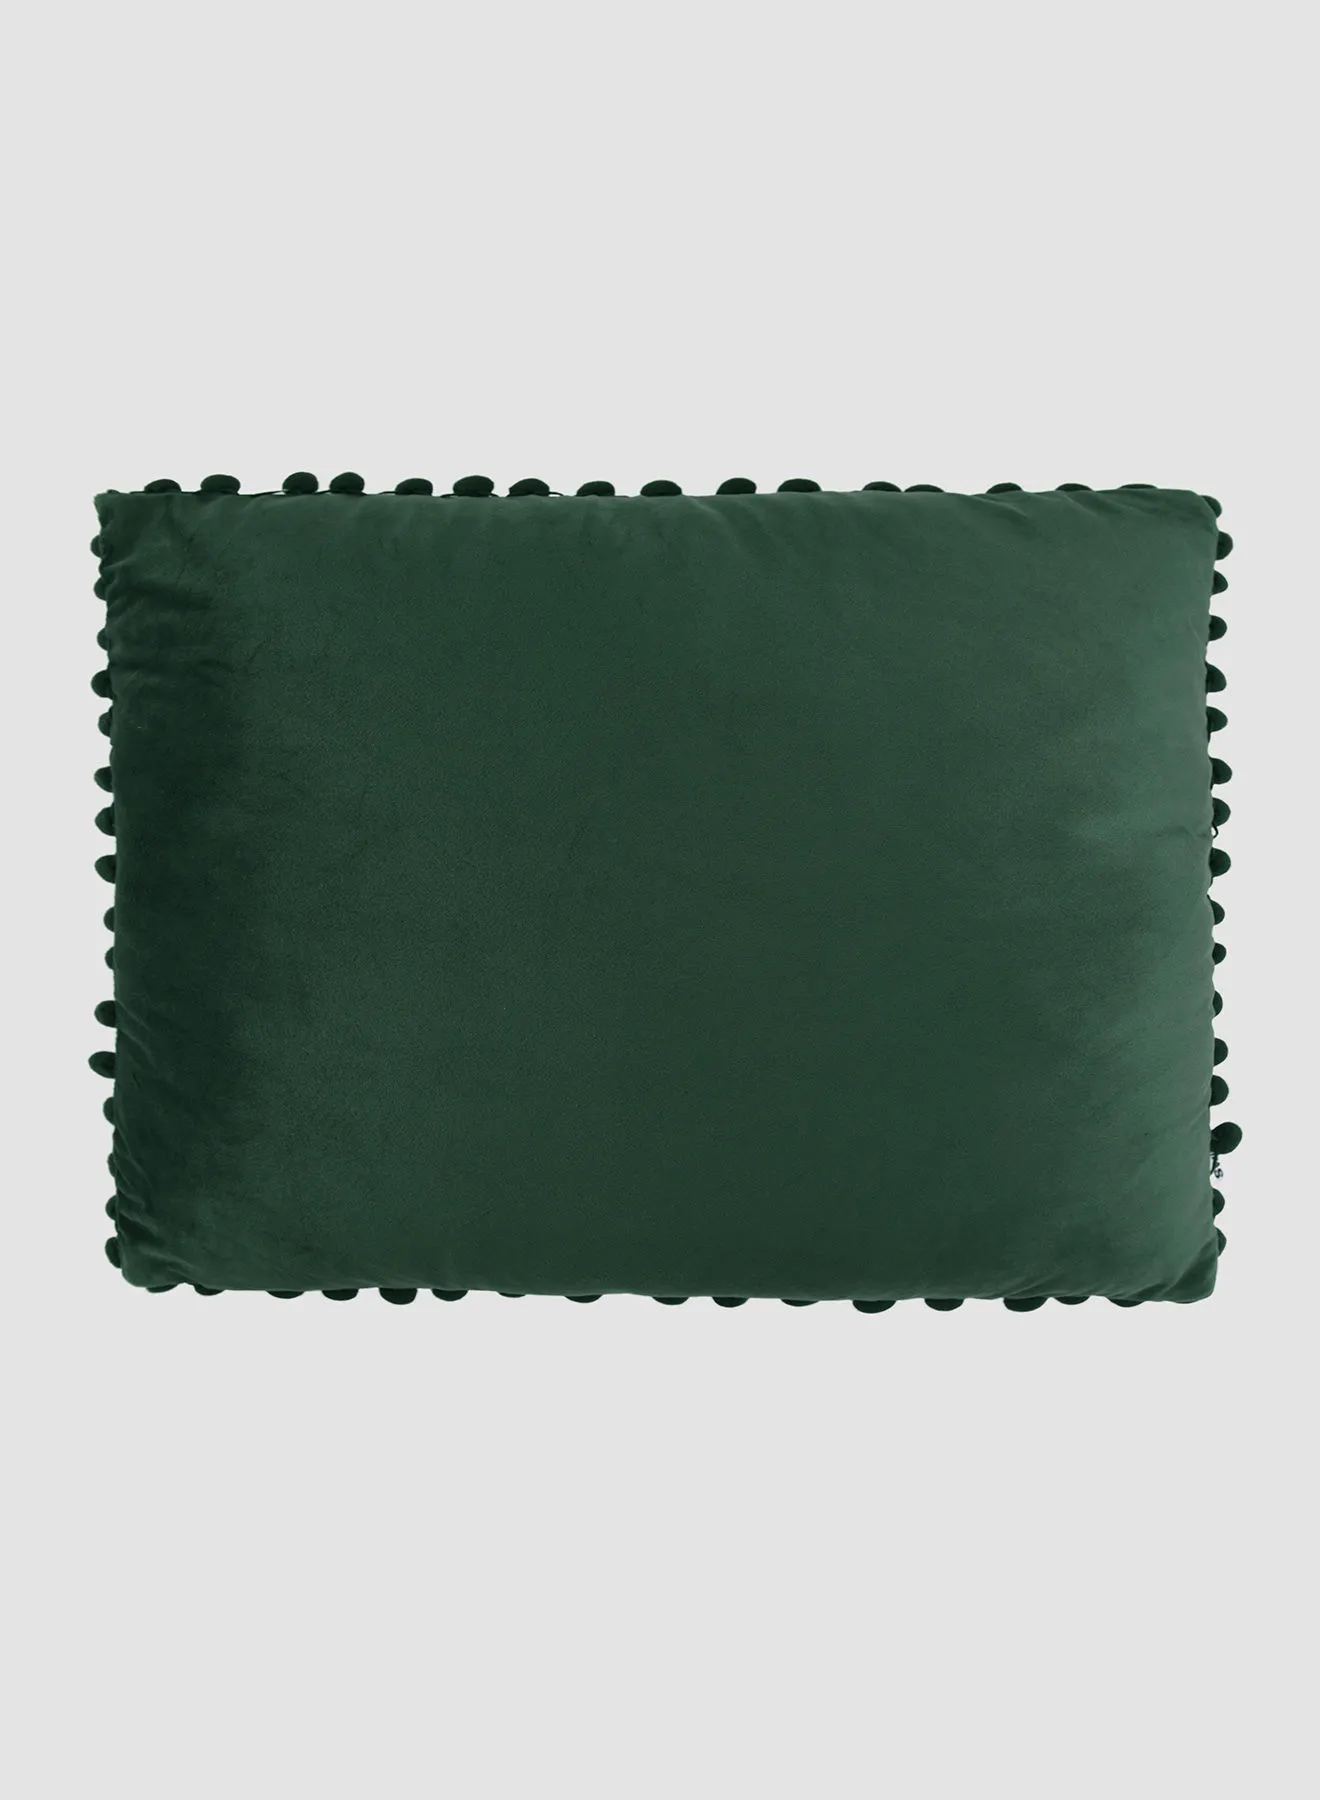 Switch Velvet Cushion  with Pom-poms, Unique Luxury Quality Decor Items for the Perfect Stylish Home Green 30 x 50cm